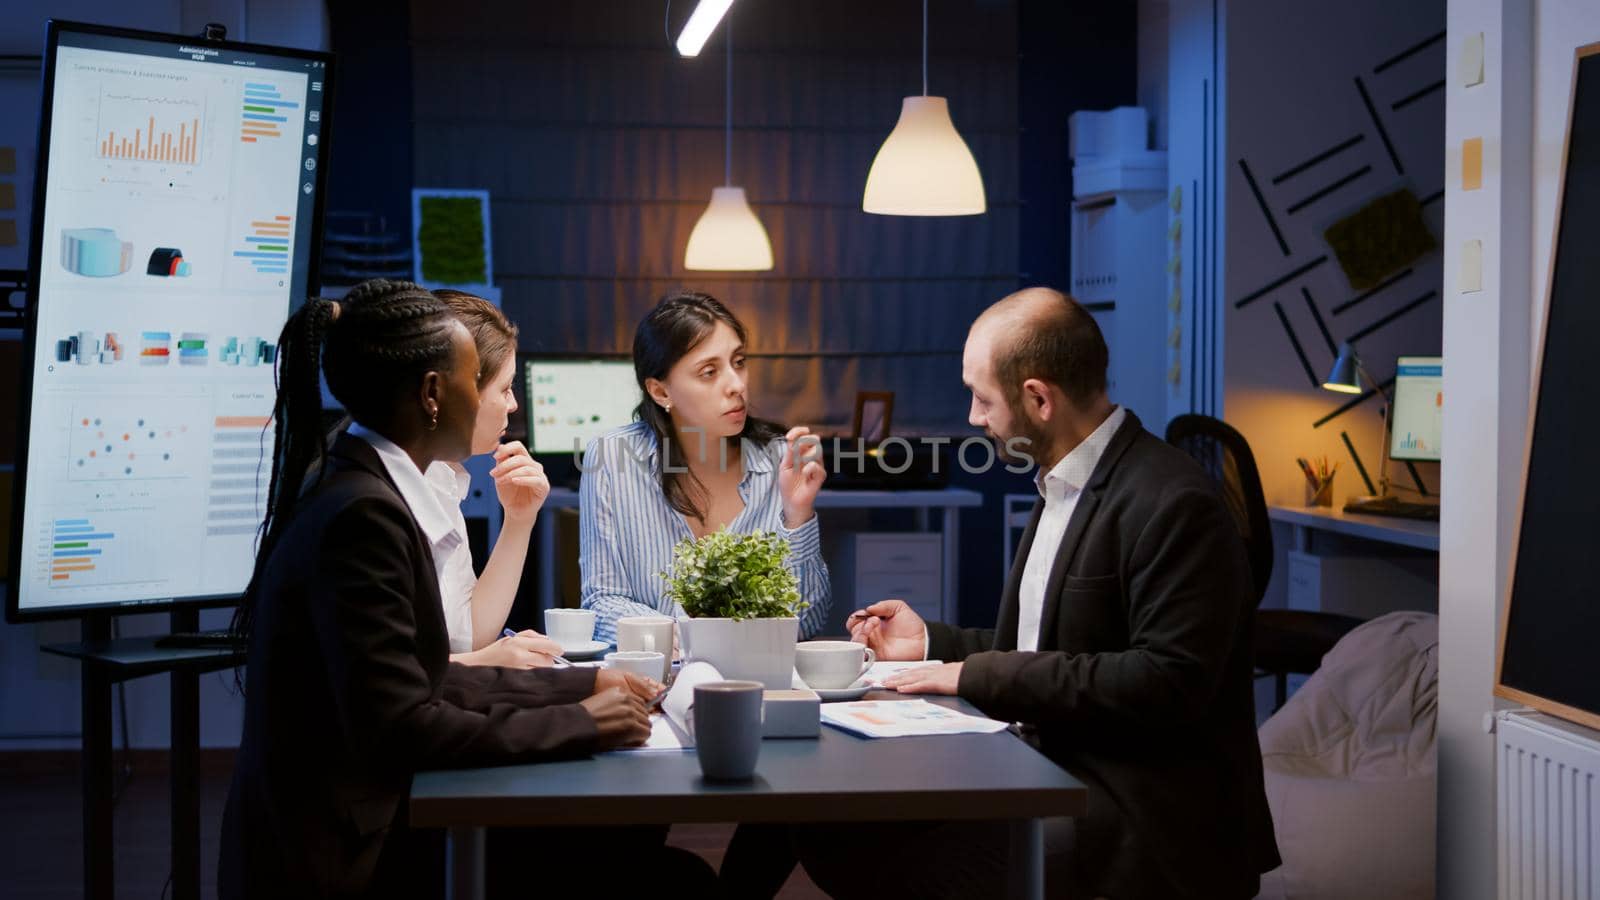 Executive manager woman explaining management statistics working at company strategy overtime in office meeting room. Diverse multi-ethnic businesspeople teamwork brainstorming ideas in evening